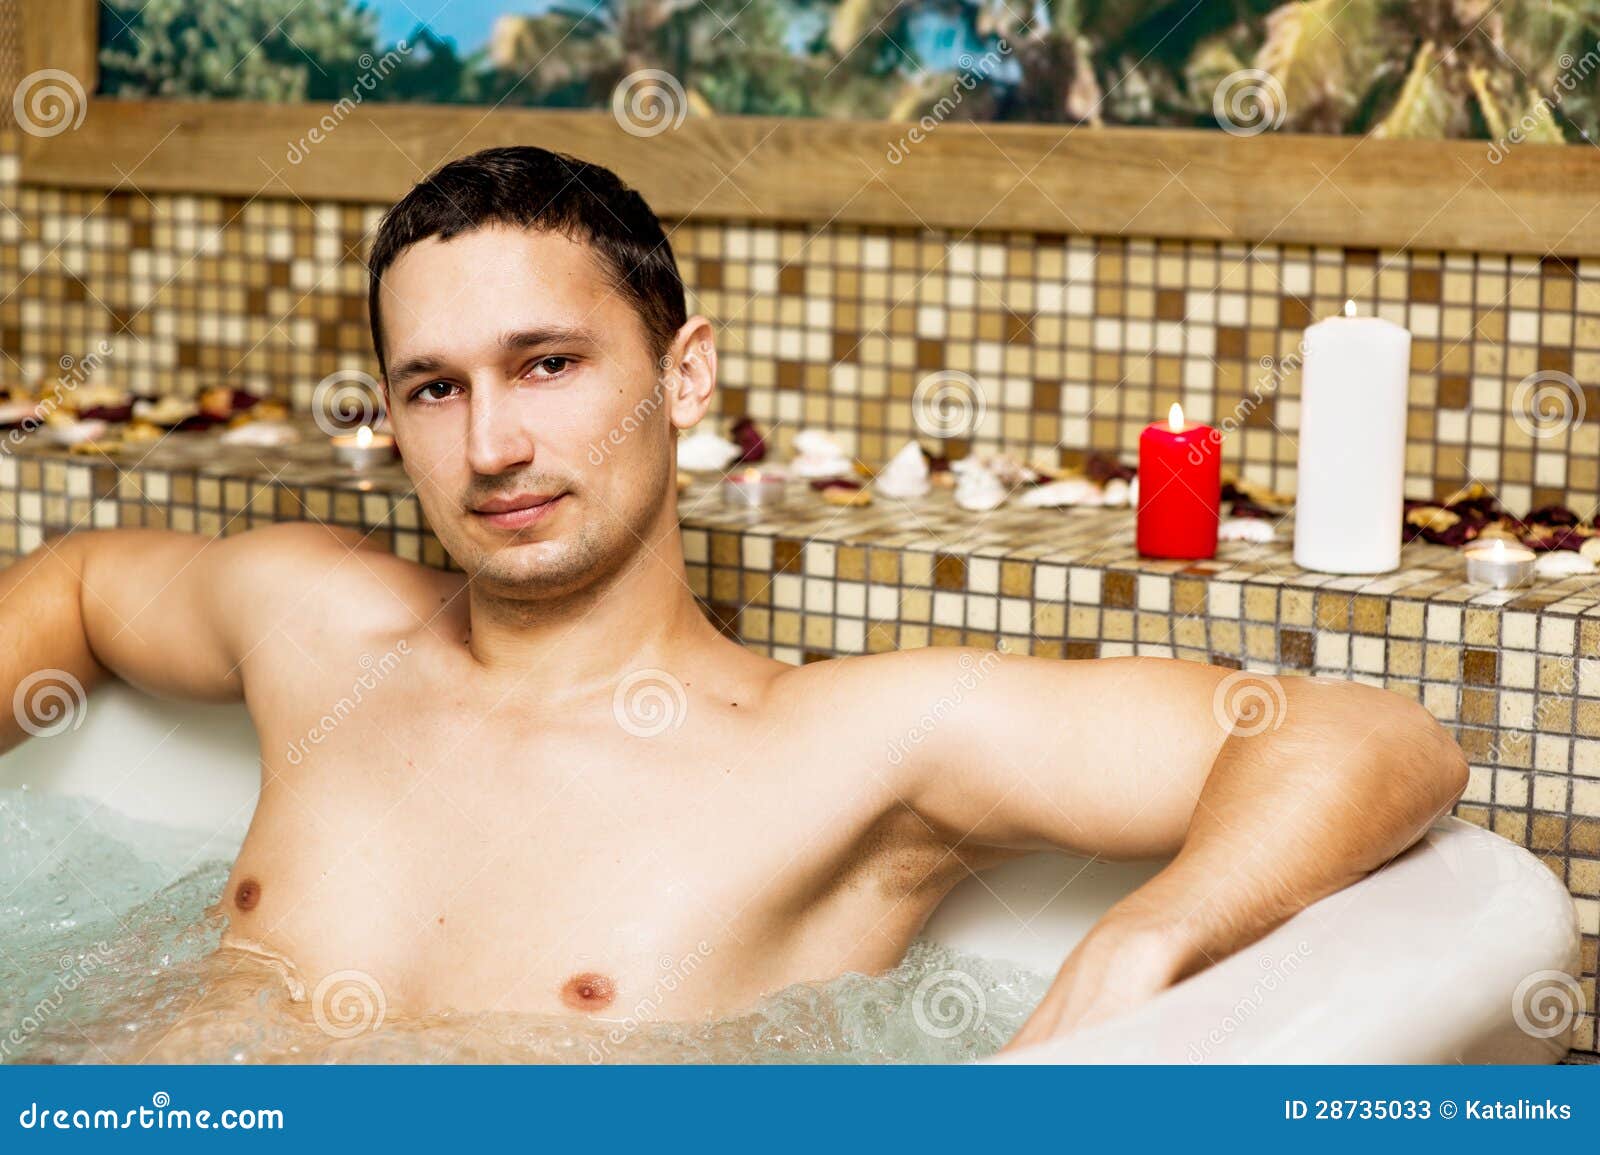 Young Man In Romantic Jacuzzi Stock Photos - Image: 28735033